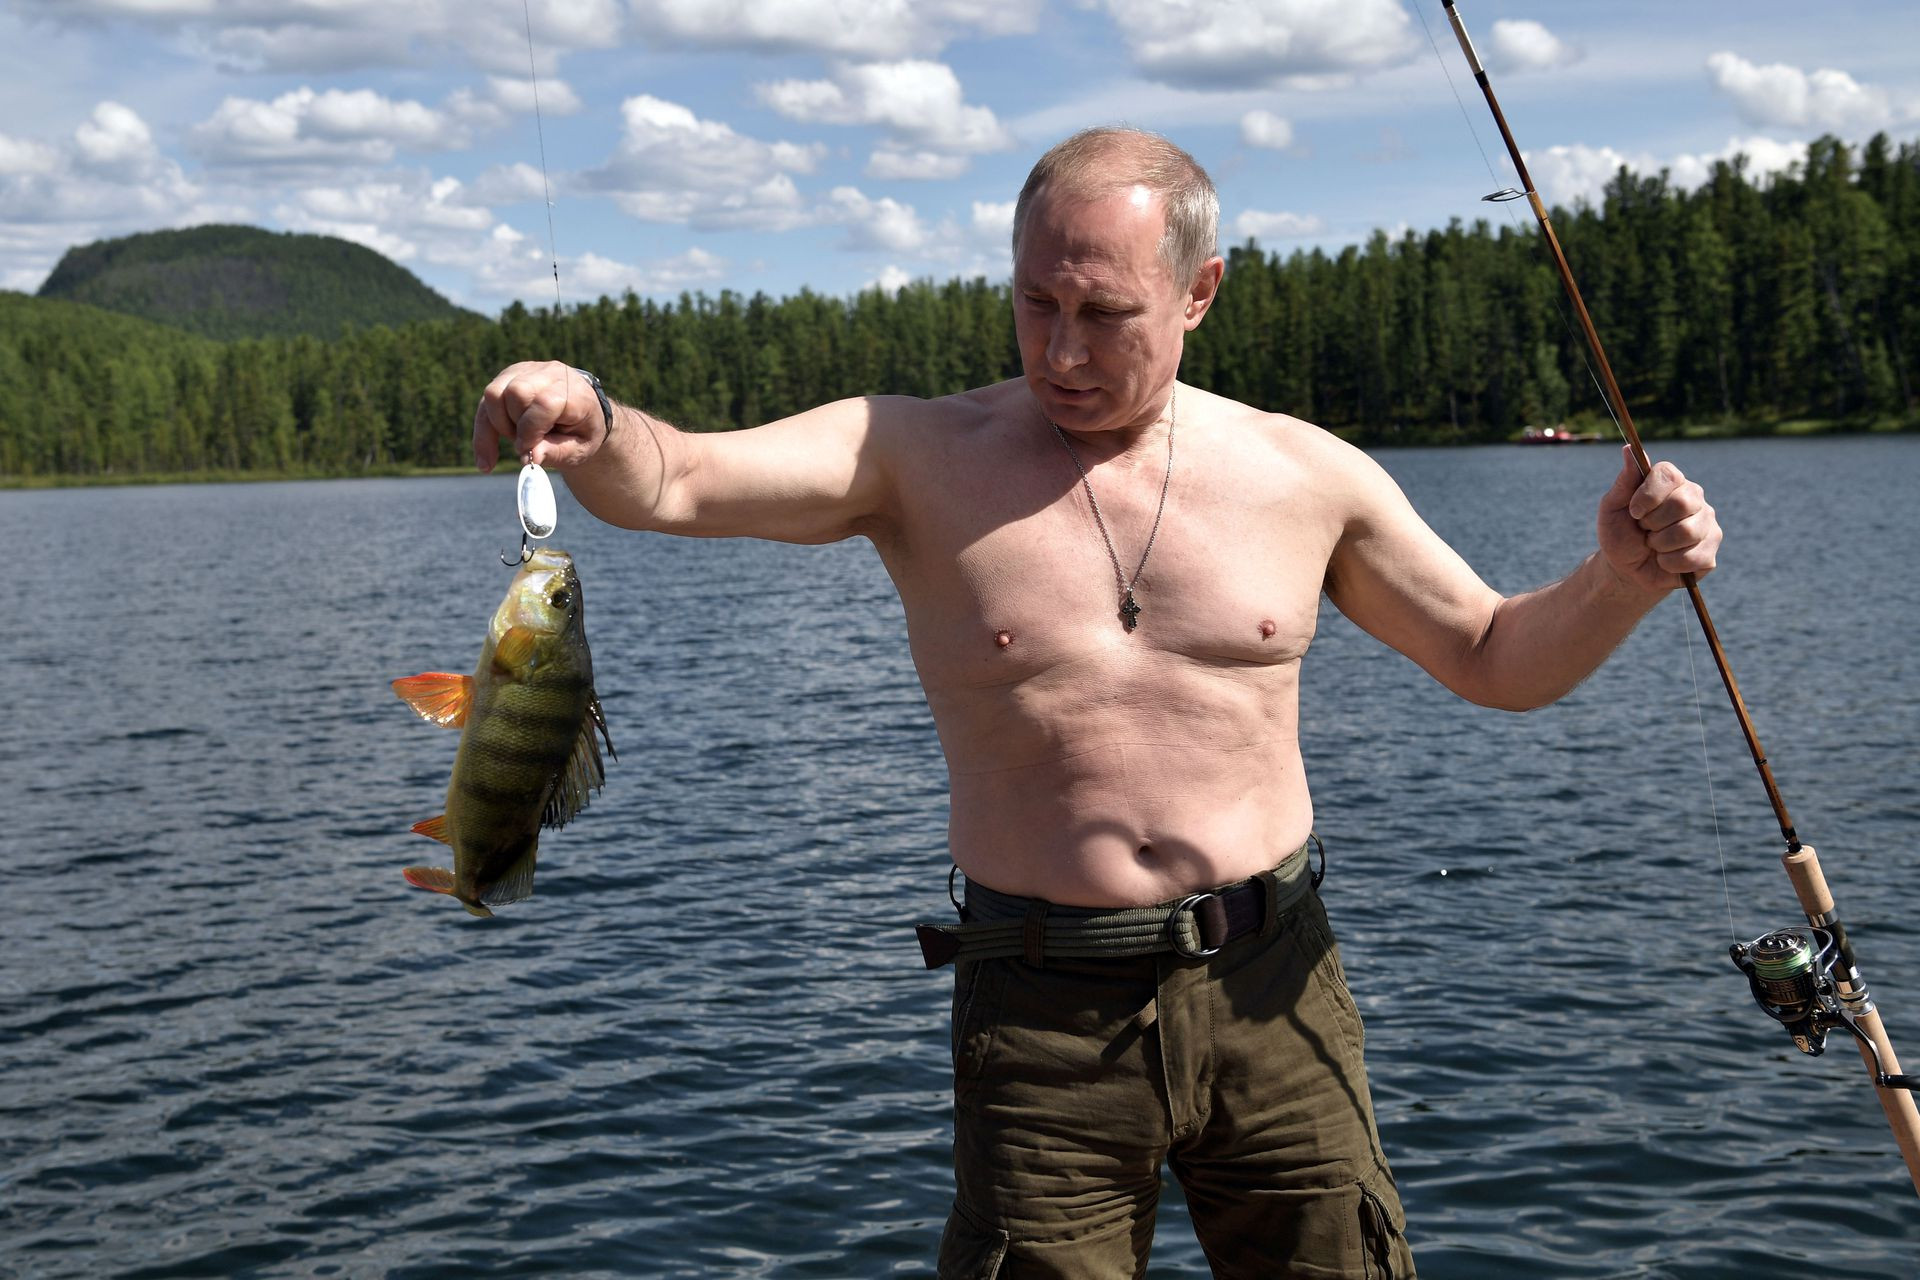 russian president vladimir putin holds a fish he caught during the hunting and fishing trip which took place on august 1 3 in the republic of tyva in southern siberia russia in this photo released by the kremlin on august 5 2017 photo reuters file